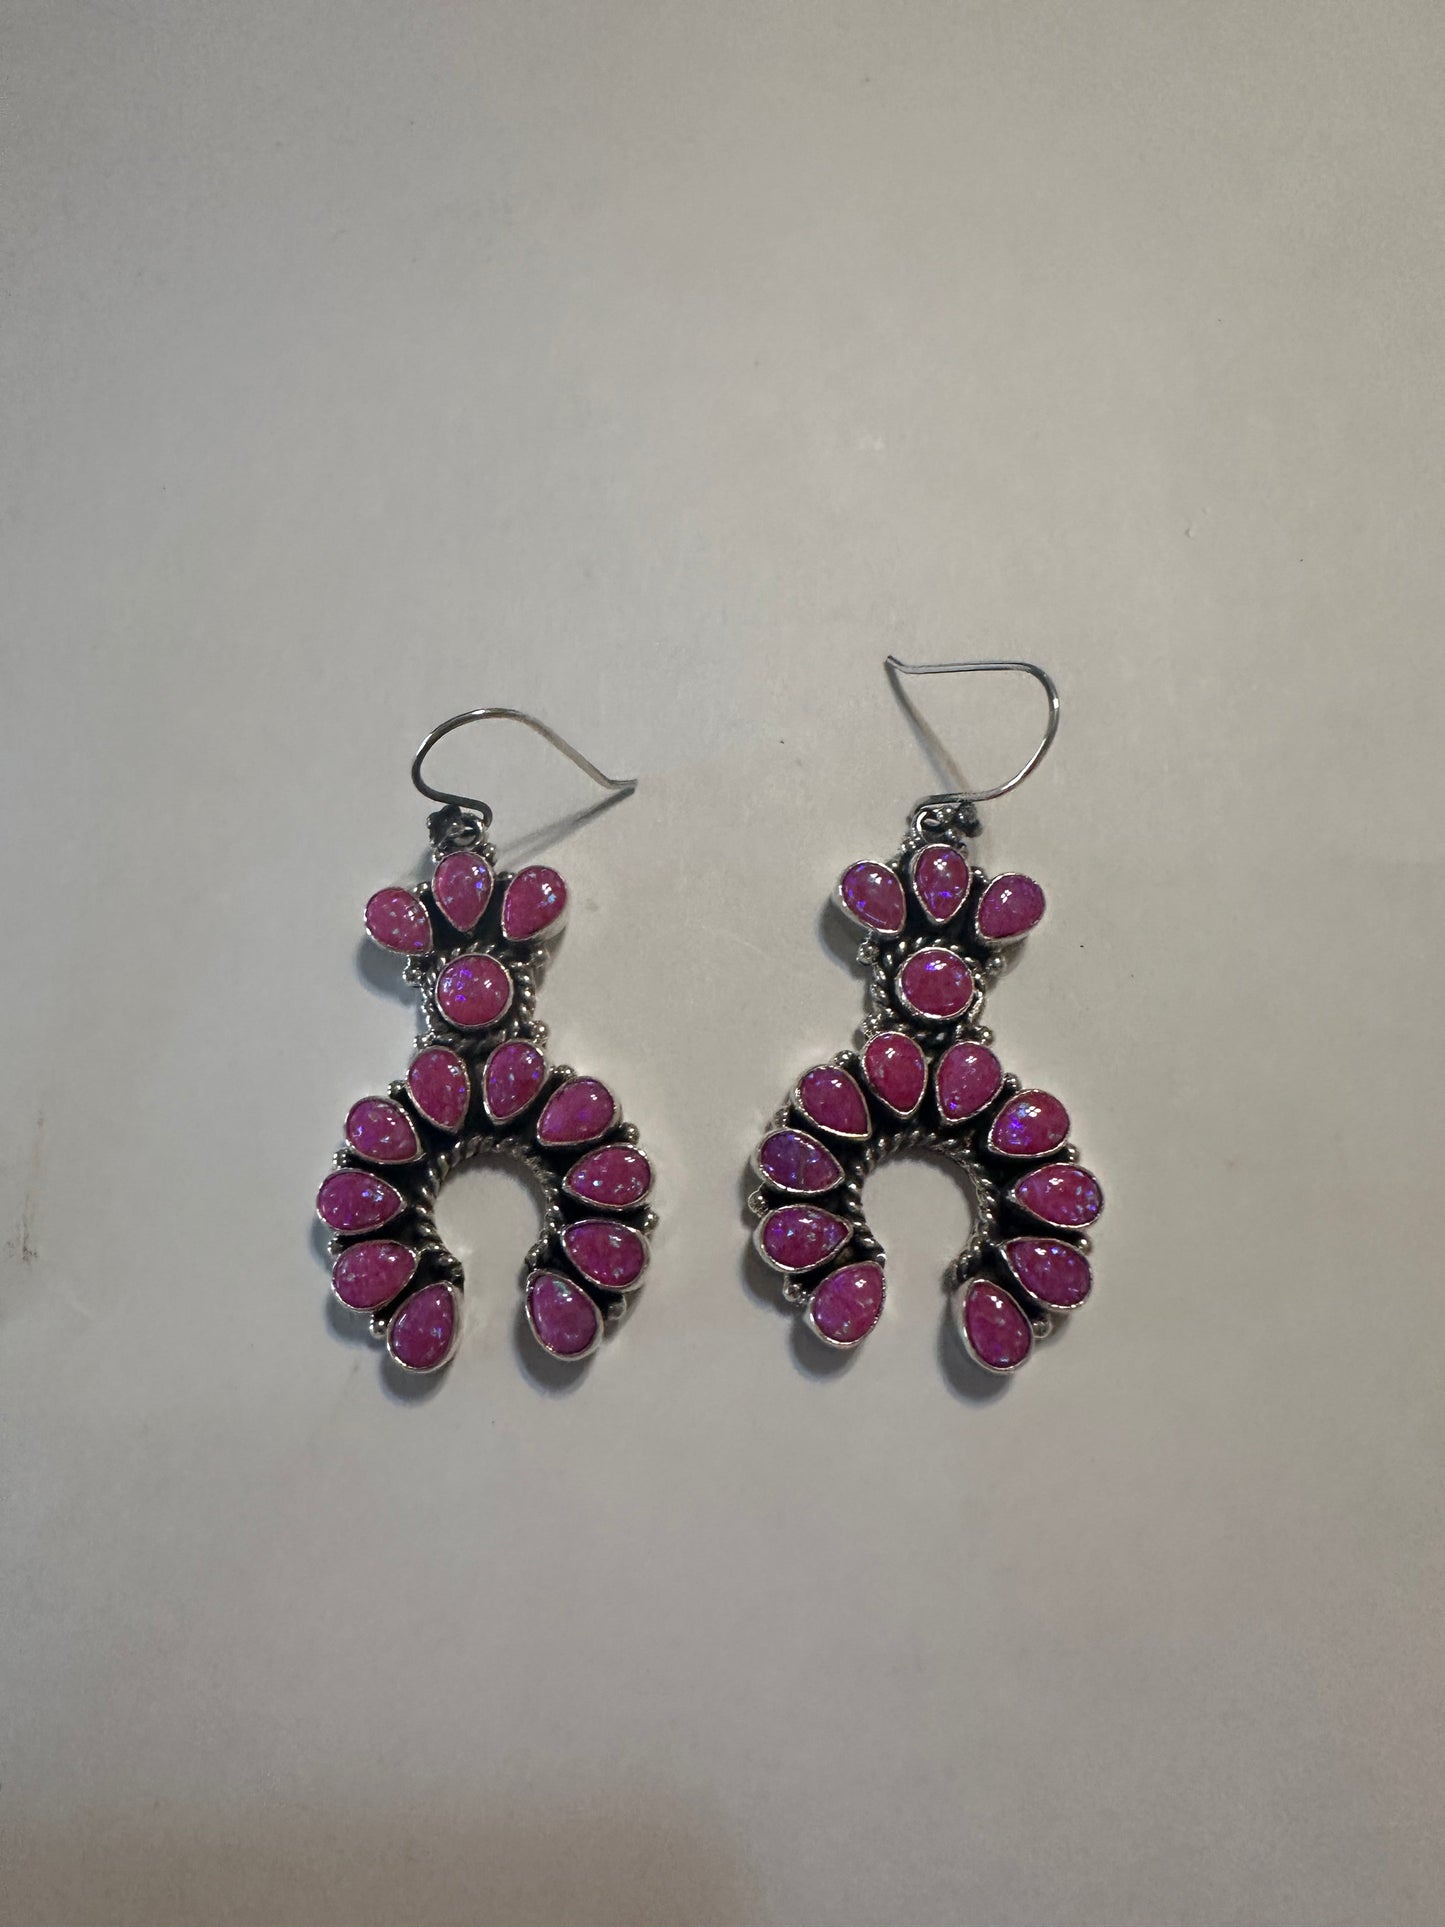 Details more than 190 hot pink and silver earrings latest